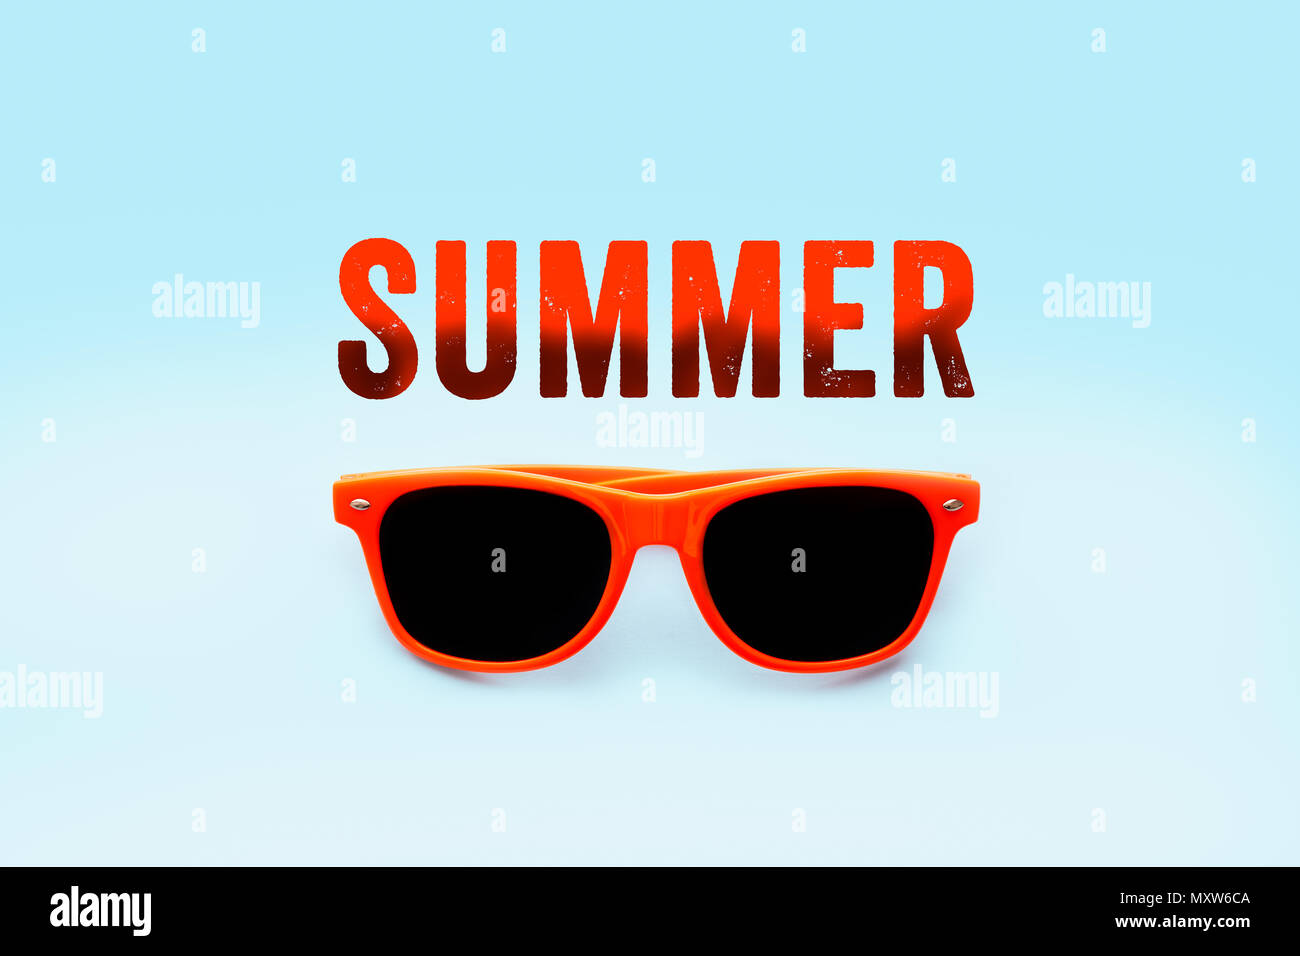 Summer Orange Text Message And Orange Sunglasses Isolated In